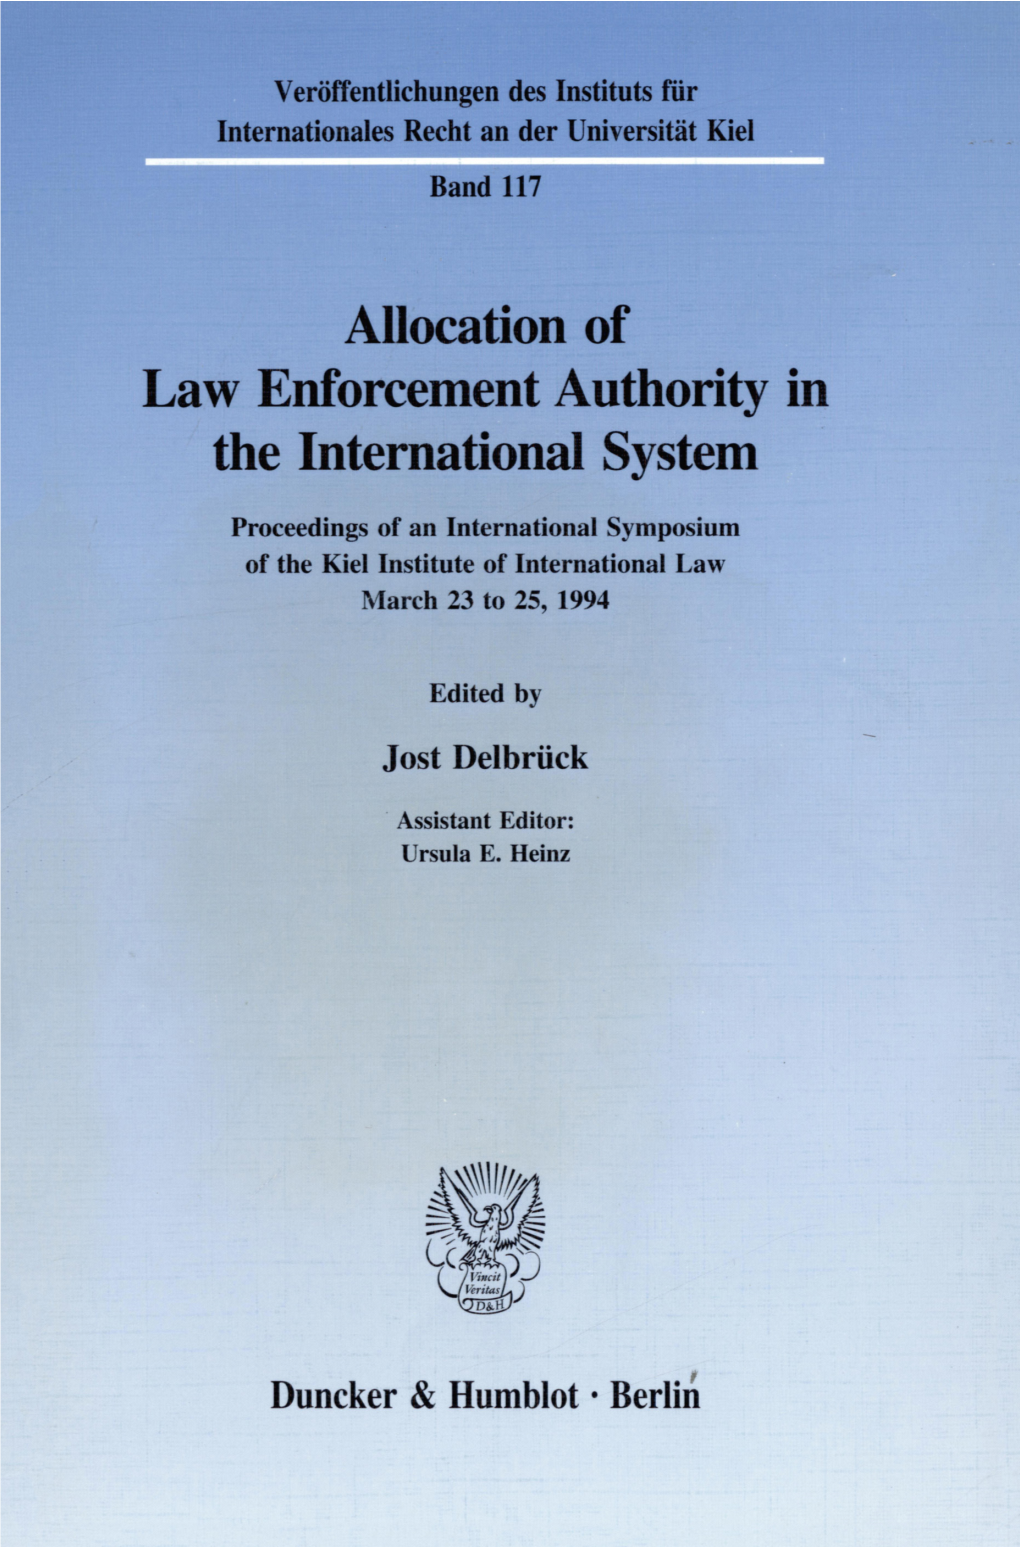 Allocation of Law Enforcement Authority in the International System. Proceedings of an International Symposium of the Kiel Insti